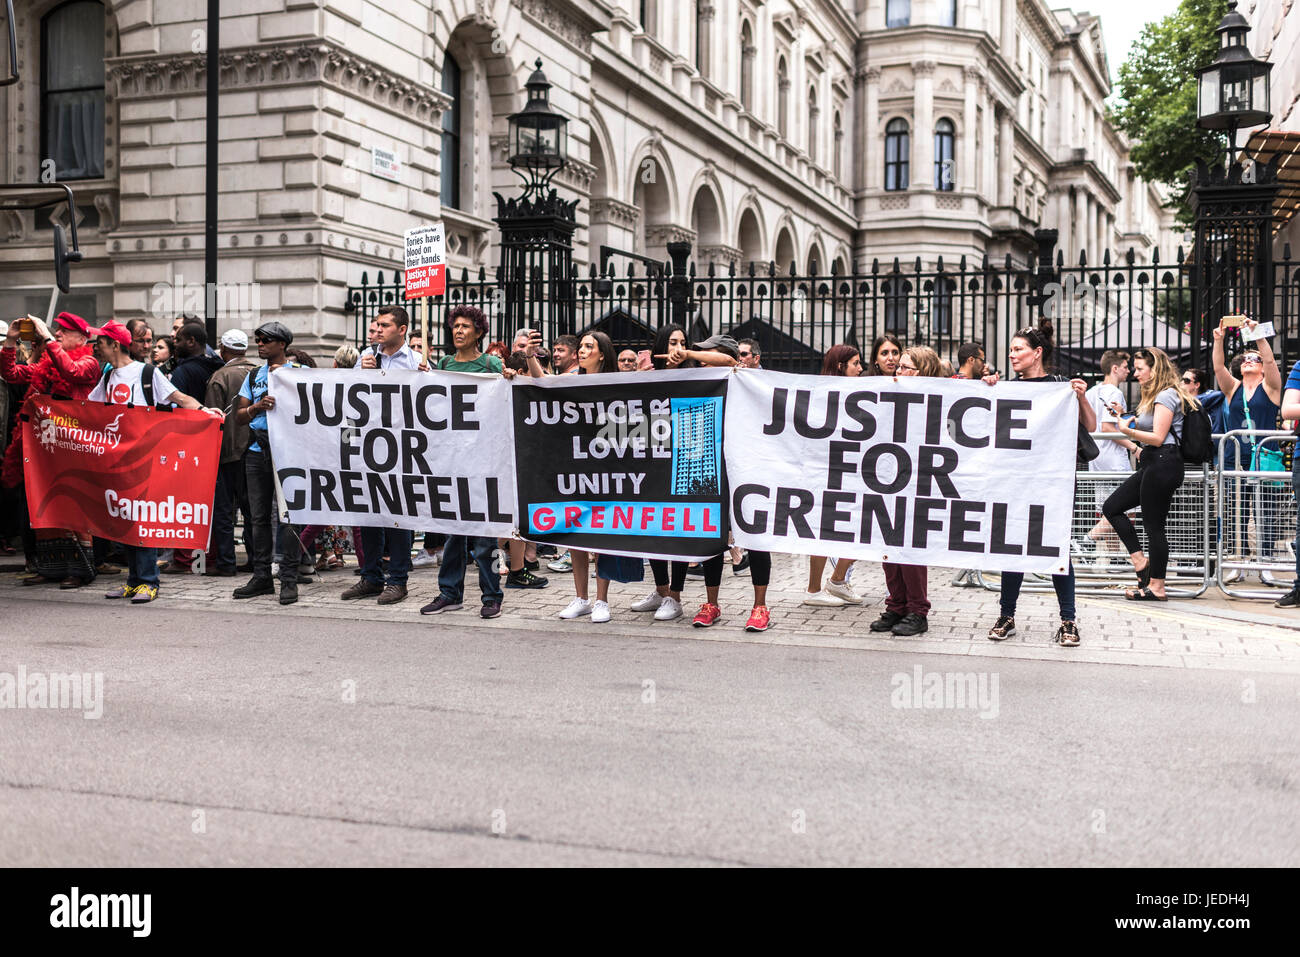 London, UK, 24th June 2017. Demonstration in front of Downing Street of the group Justice for Grenfell Credit: onebluelight.com/Alamy Live News Stock Photo